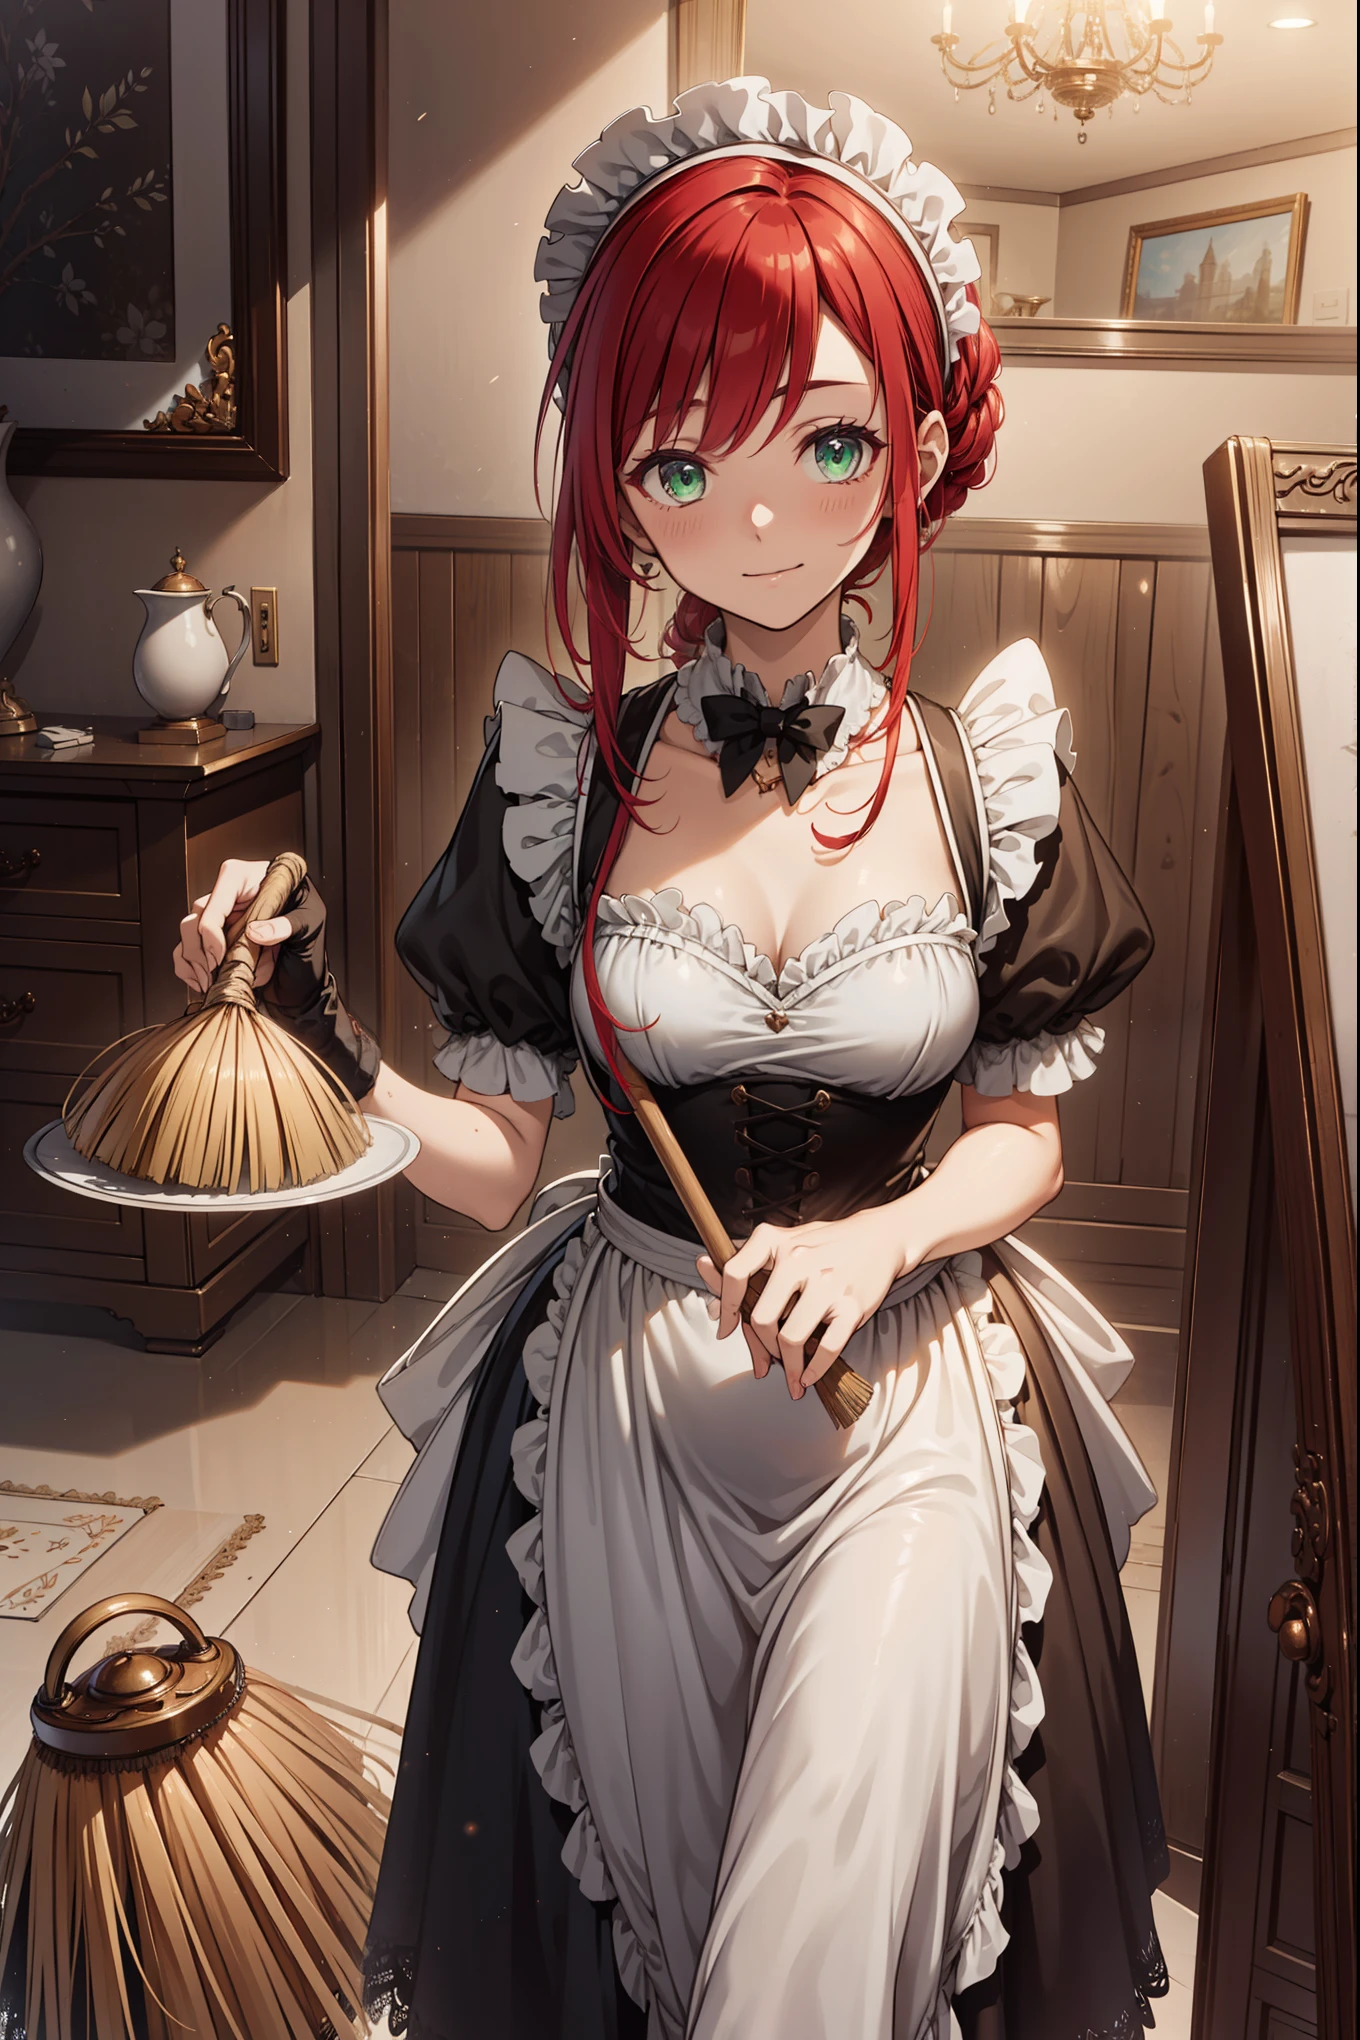 (Best quality, A high resolution, Textured skin, High quality, High details, High details,Extremely detailed CG unity), Enchanted，having fun，Being in love，housekeeper in fantasy world, crimson red hair, green eyes, exquisite costumes，solo person，long elegant dress, A small amount of lace，Dazzle, woman, beautiful, (maid), (house keeper), (in grand home), (luxurious house), house keeper female, more details, detailed home scene, home detailed, (holding broom), maid